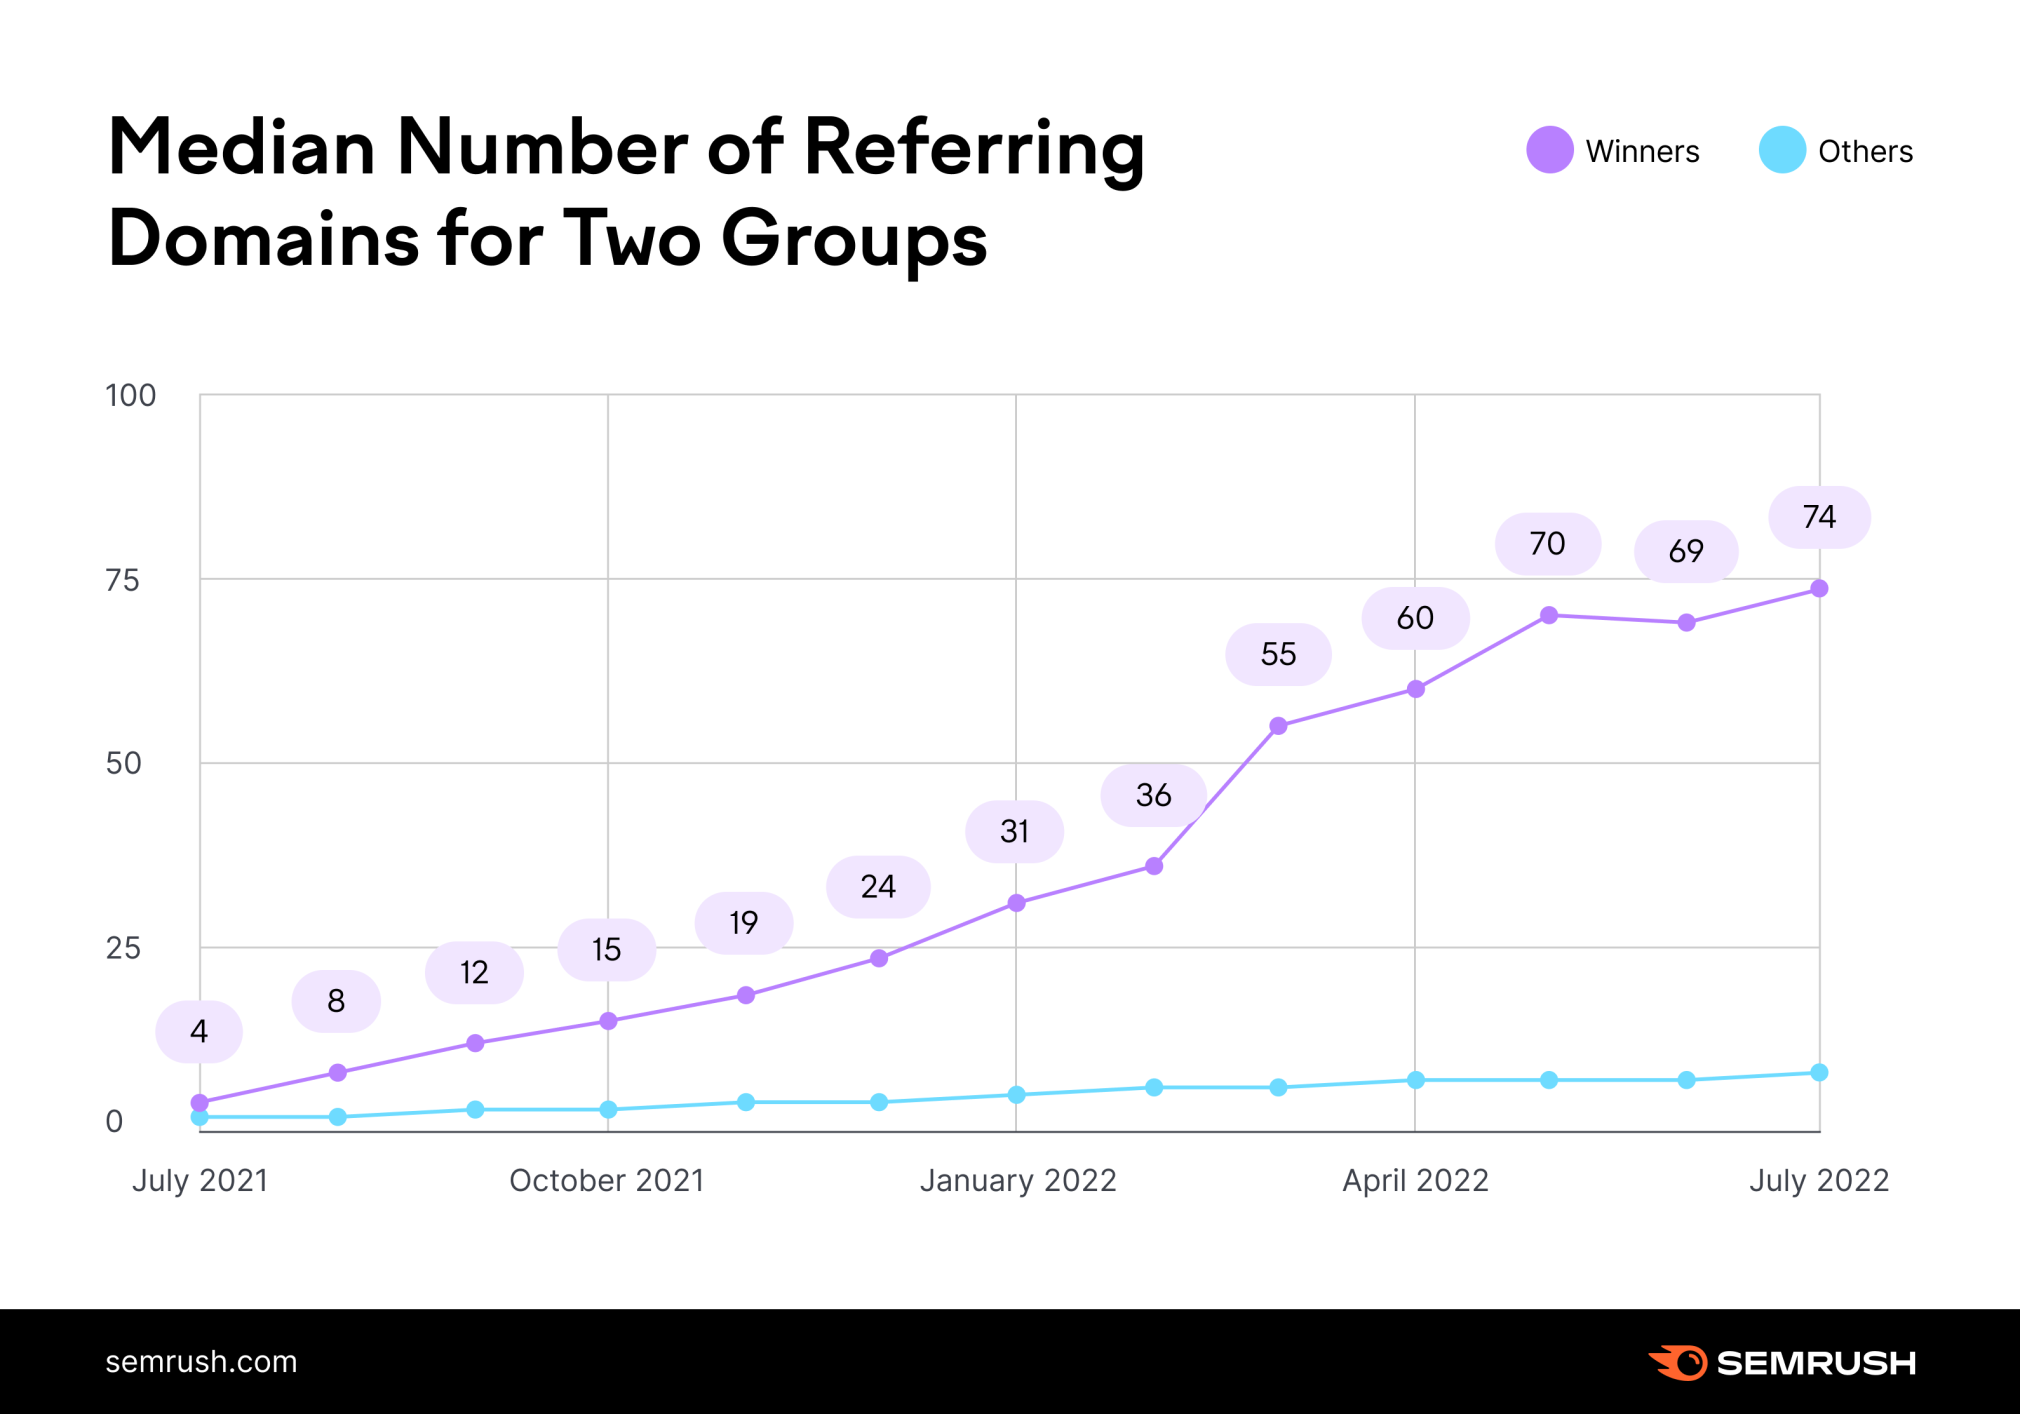 A chart from Semrush compares the median number of referring domains for two groups of websites.